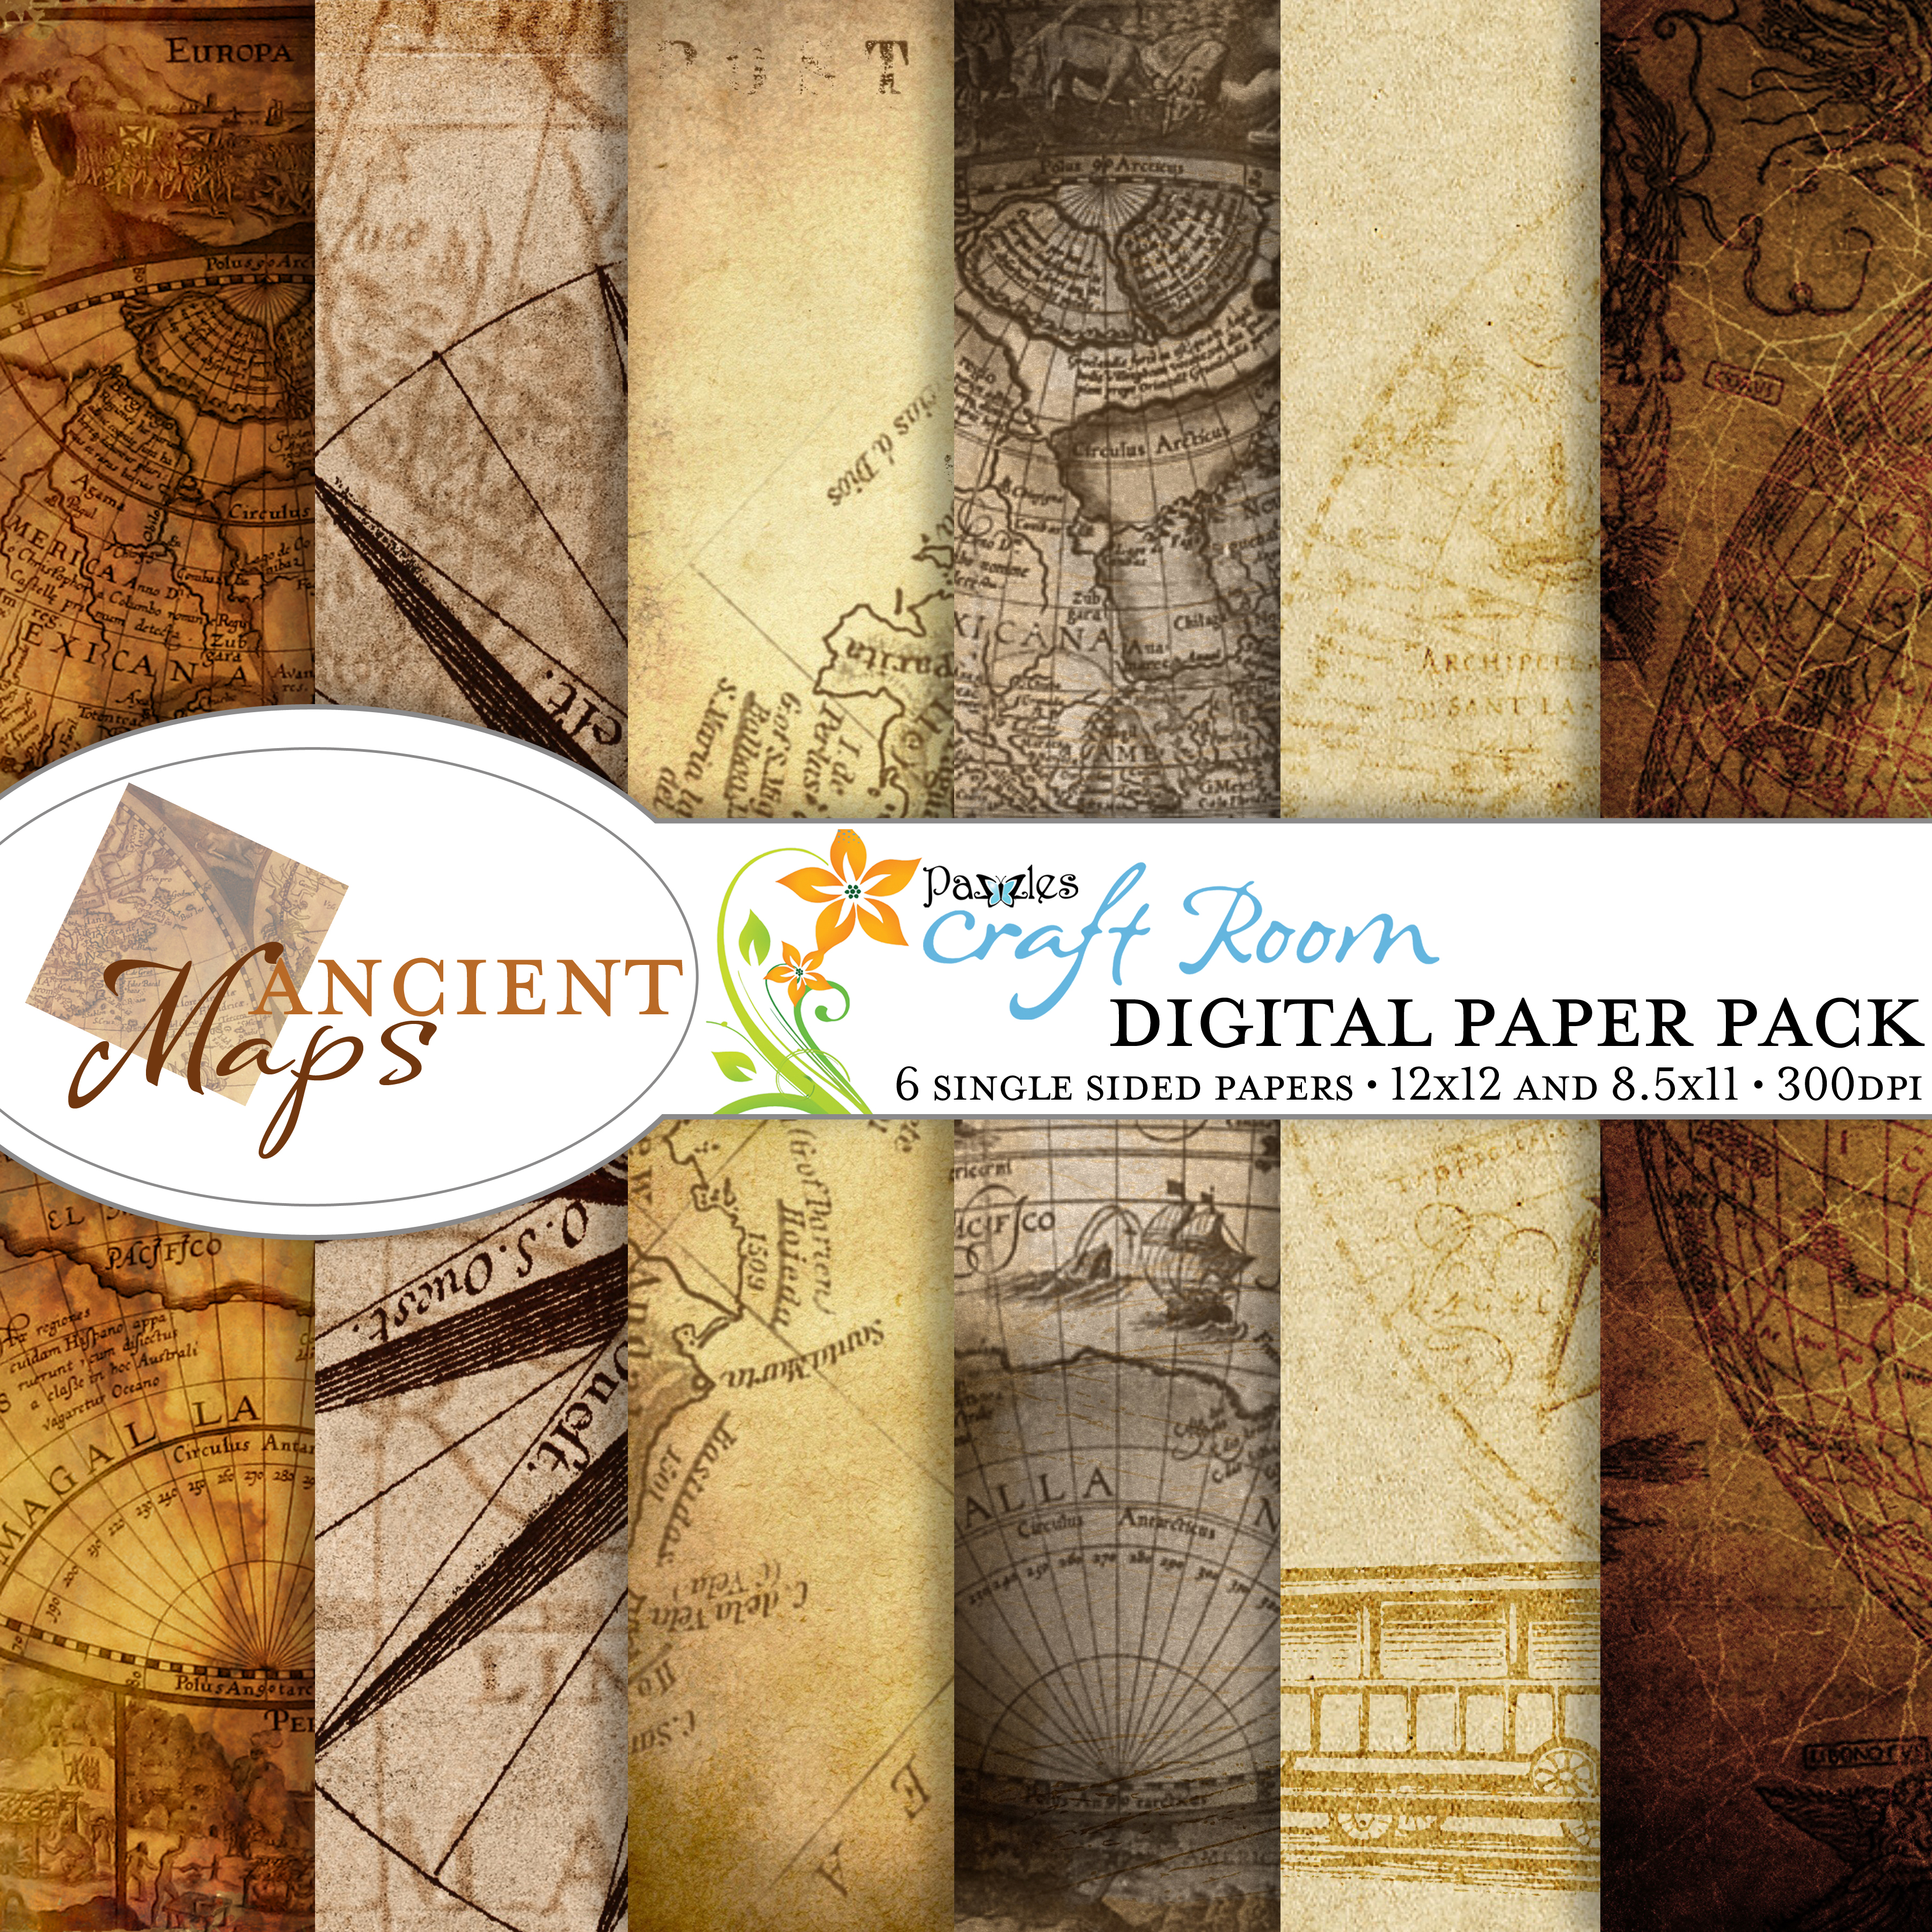 Antique Sheet Music Digital Paper Pack - Pazzles Craft Room